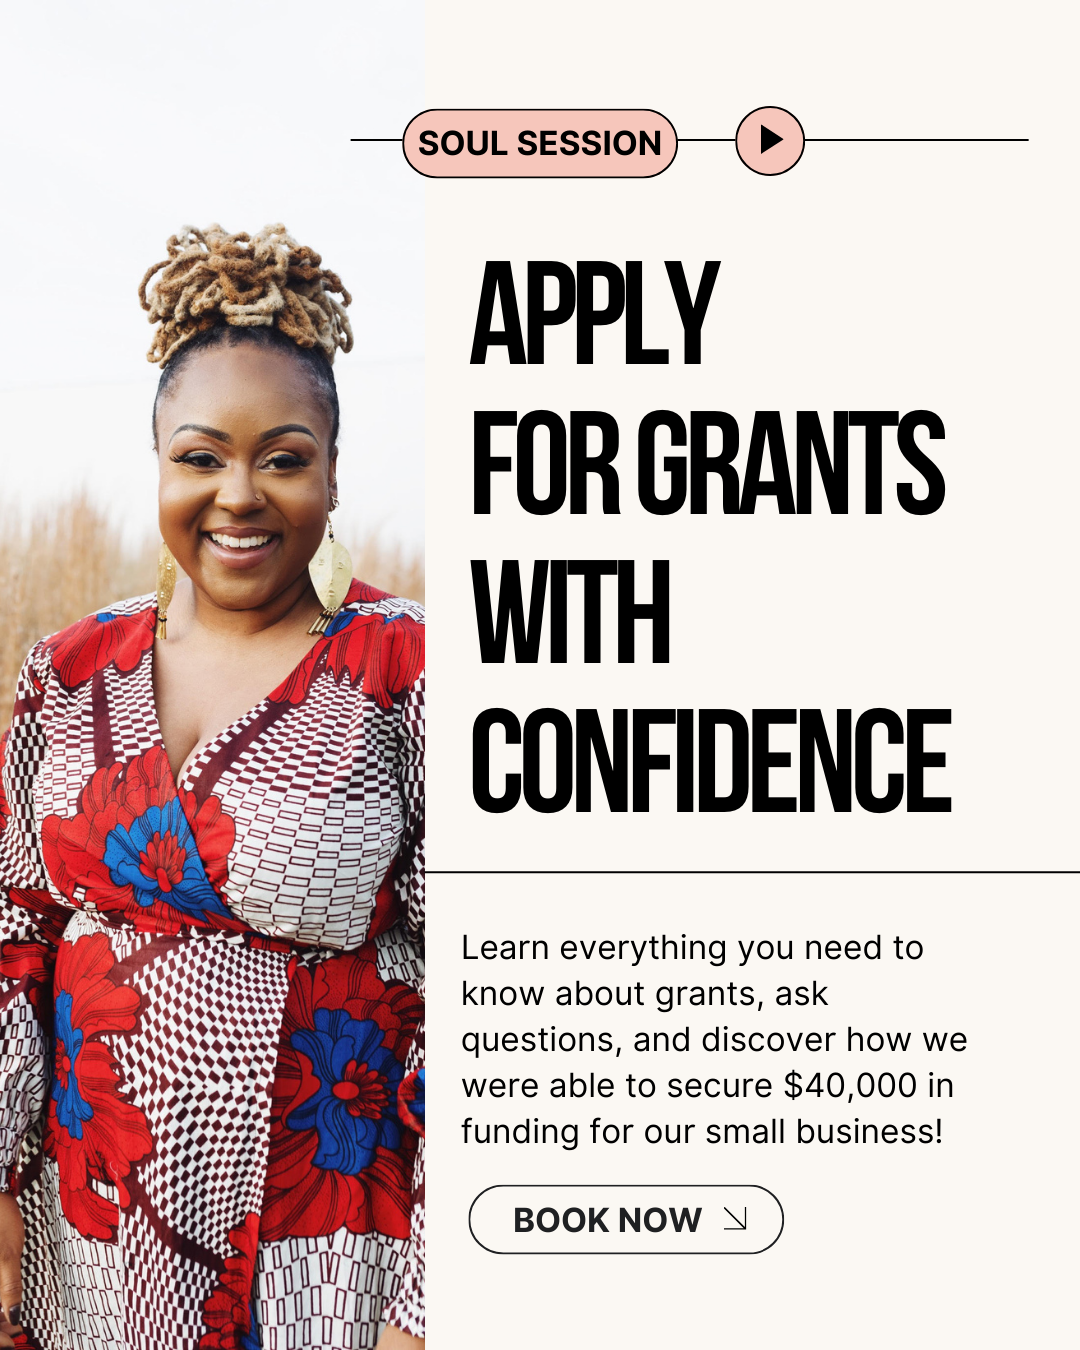 Apply for grants with confidence! 💰